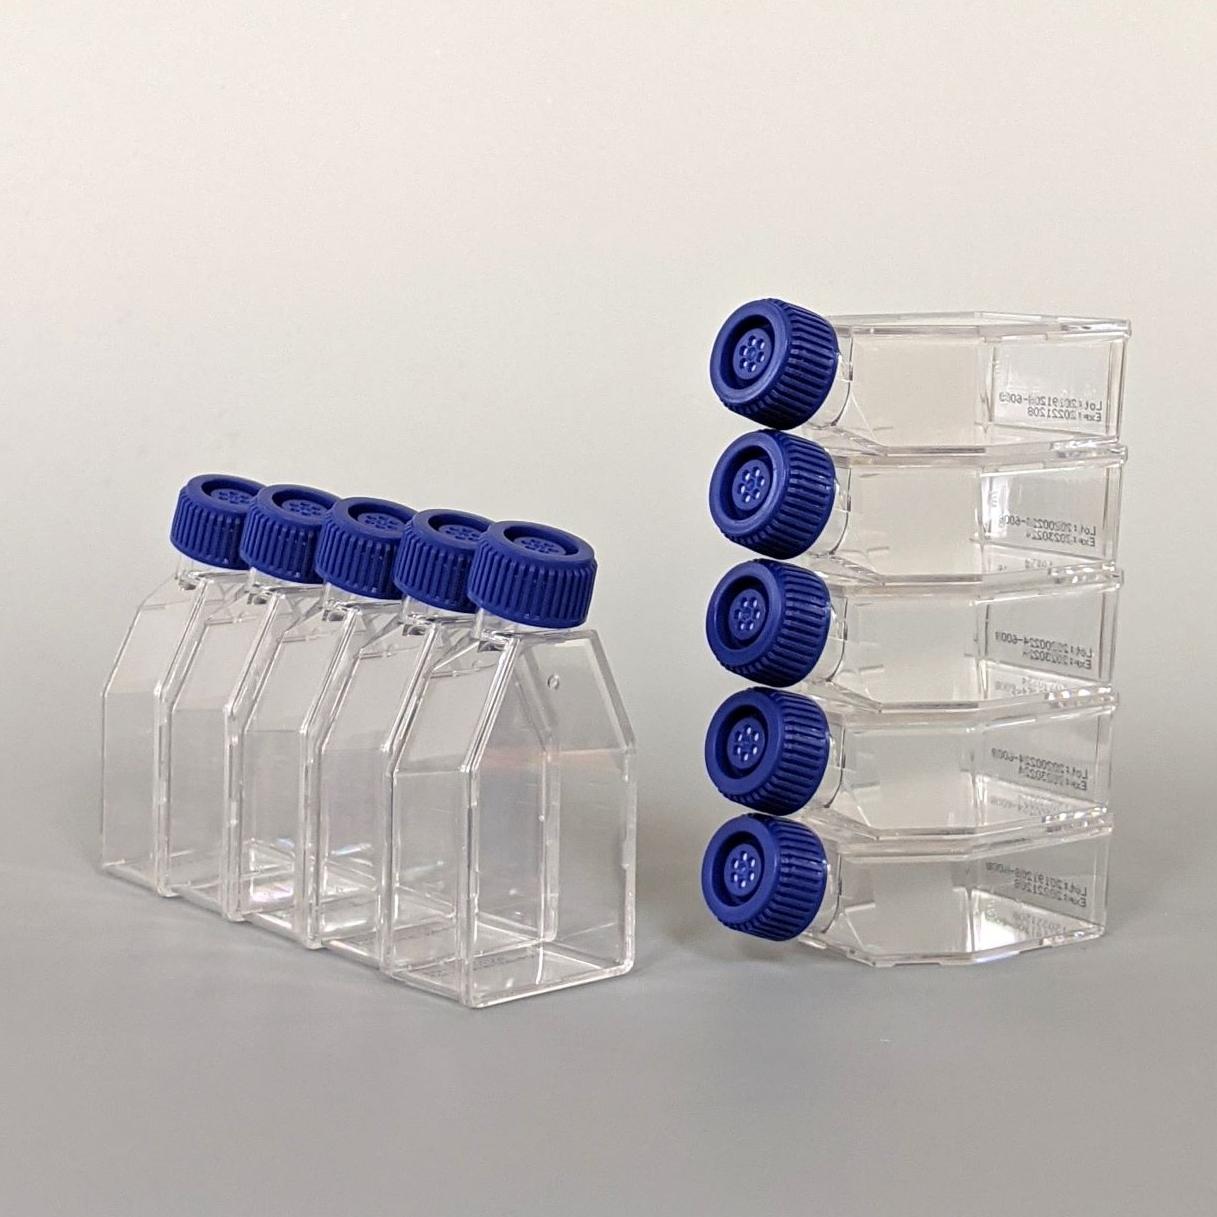 CytoSoft T-25 Flasks PDMS soft substrate surfaces